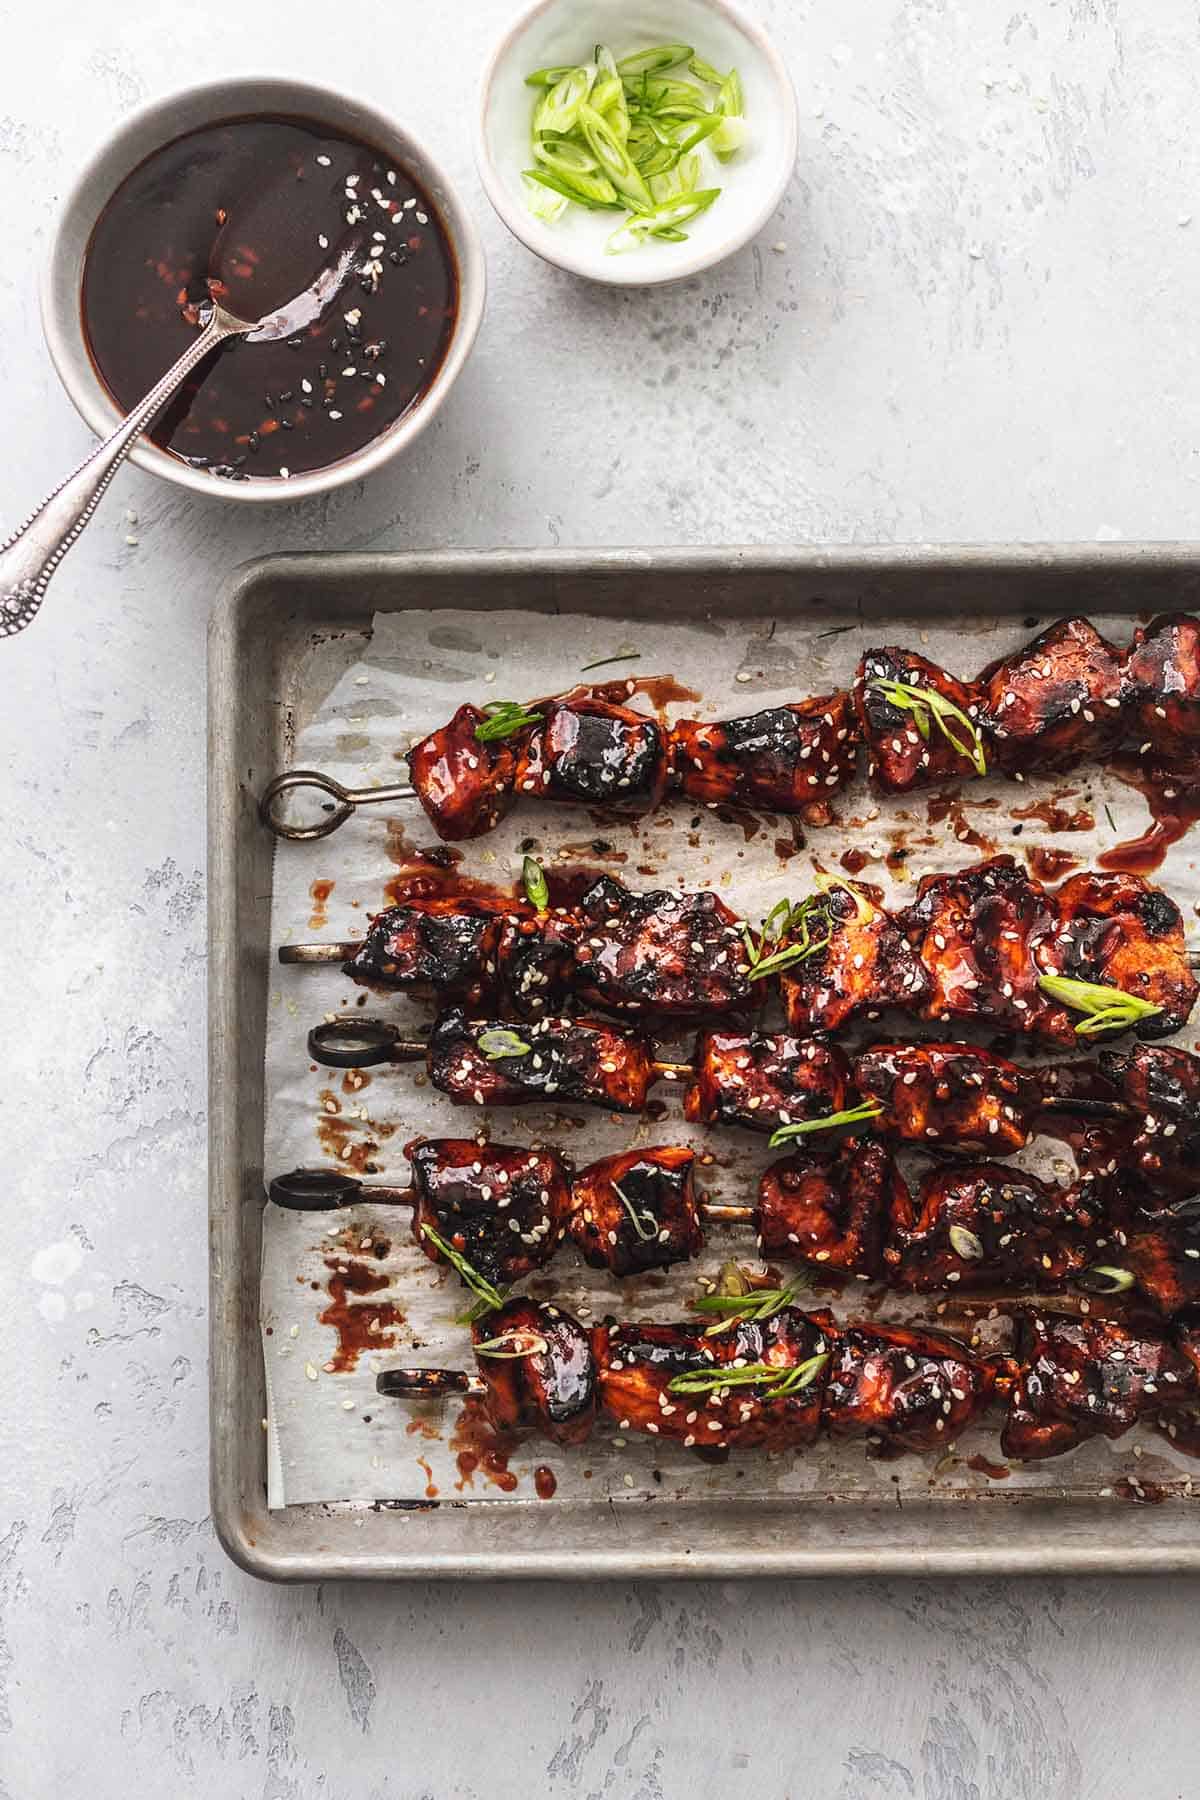 top view of Korean bbq chicken skewers on a baking sheet with two small bowls of condiments on the side.